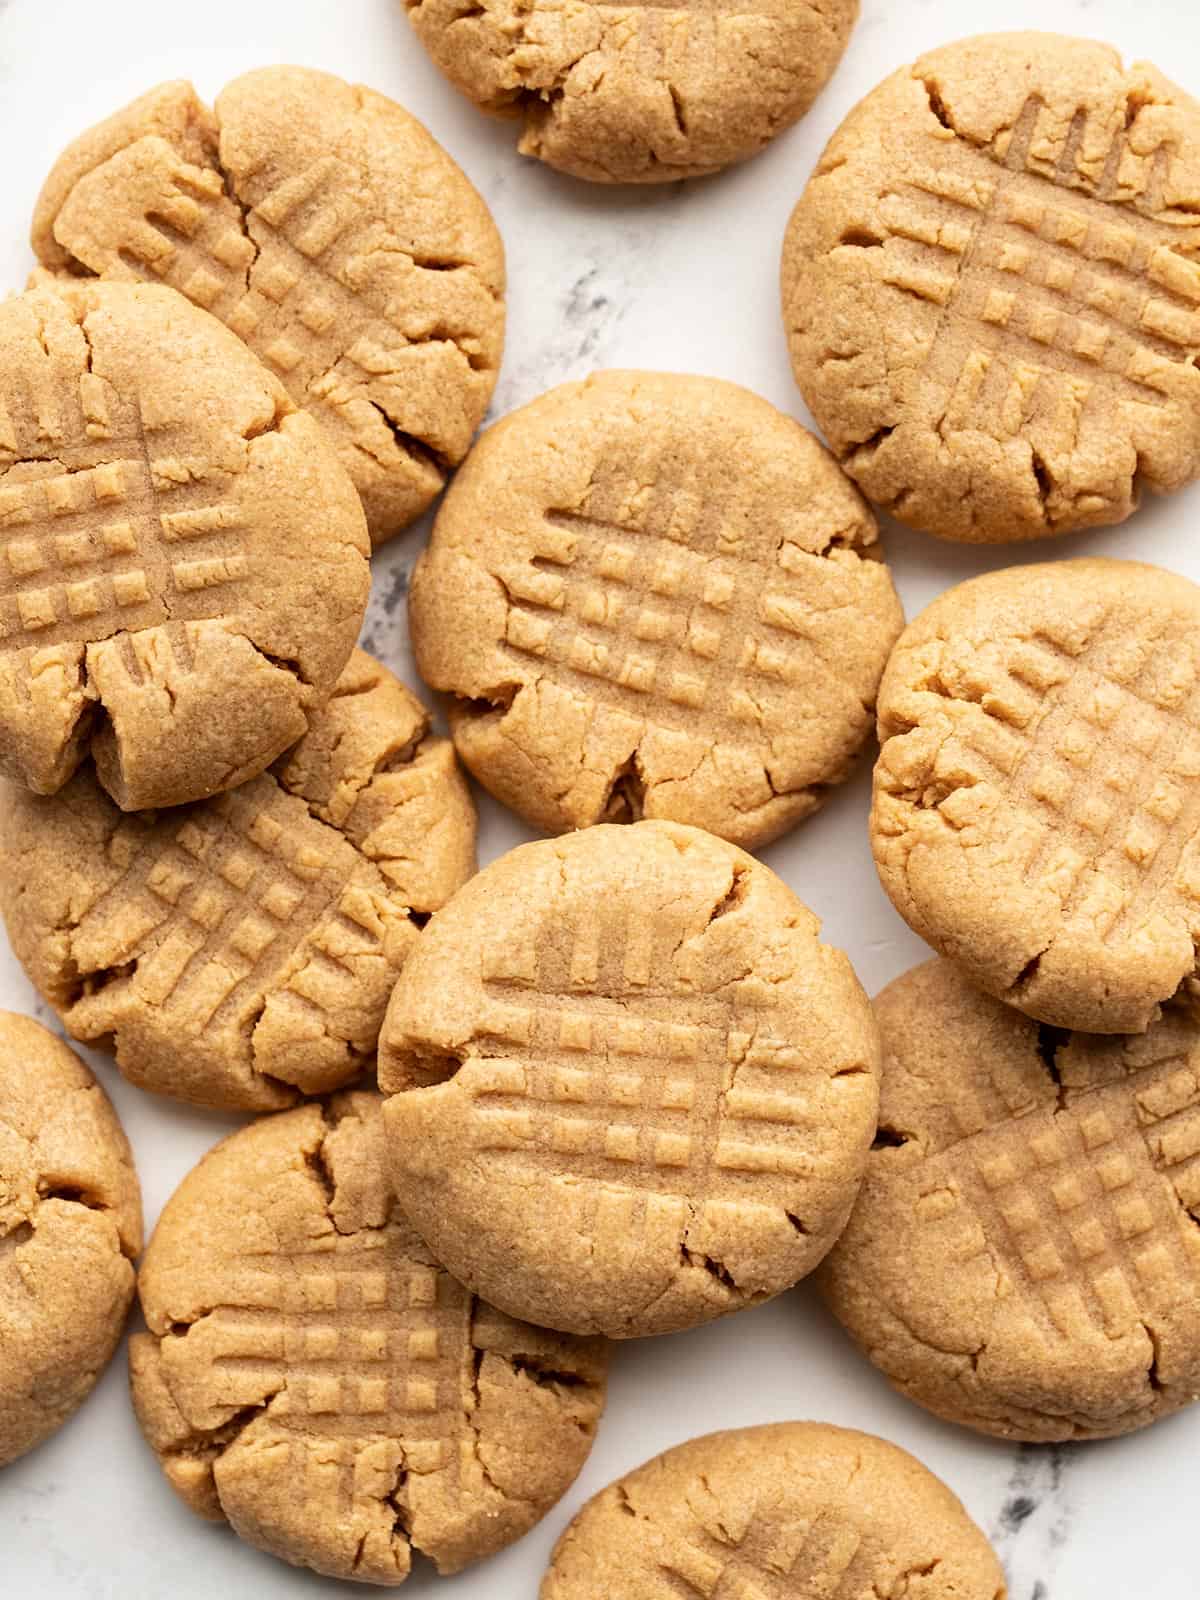 Overhead view of peanut butter cookies scattered on a surface.